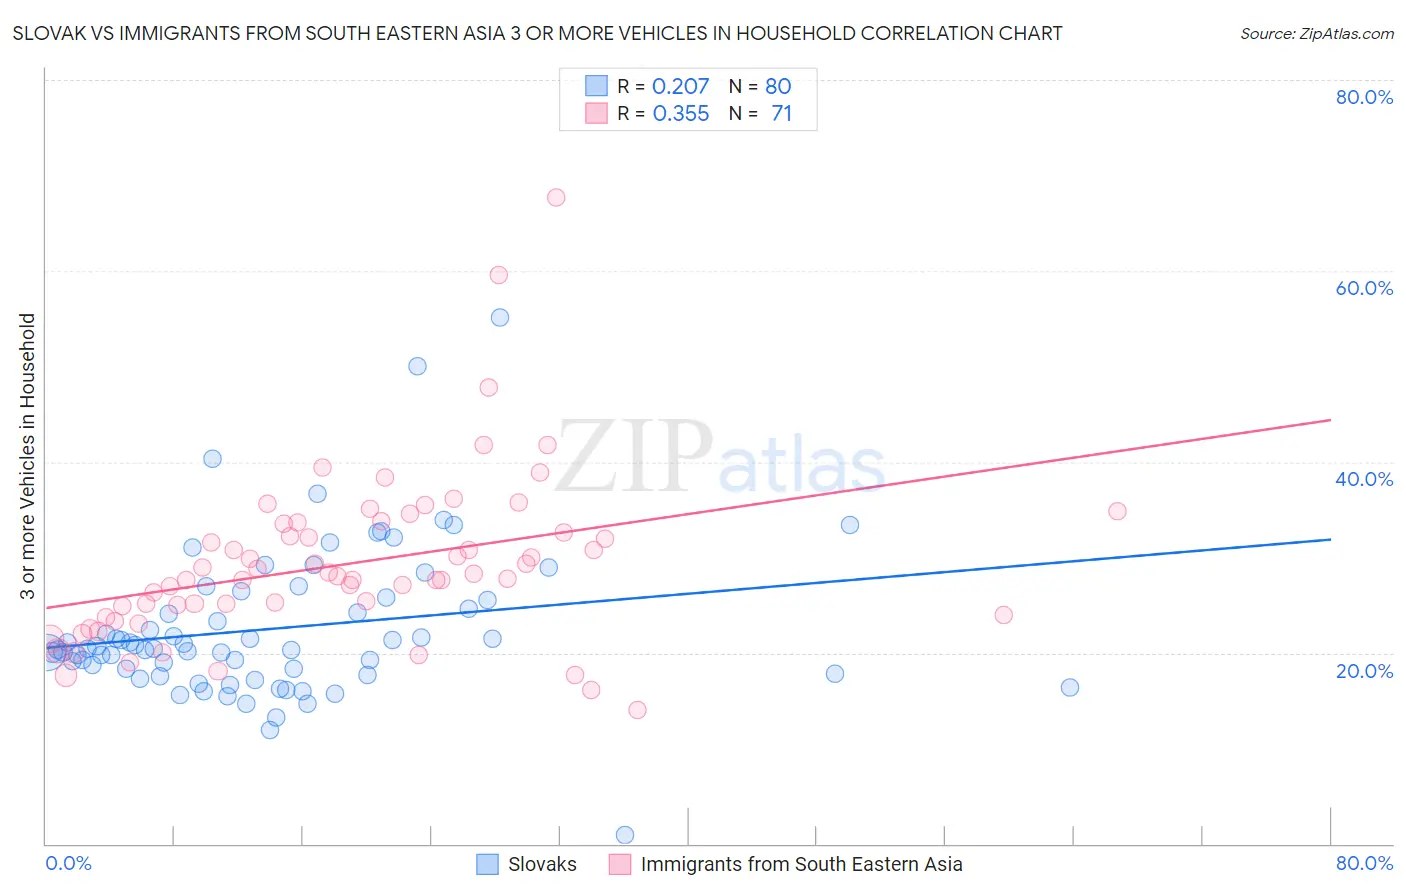 Slovak vs Immigrants from South Eastern Asia 3 or more Vehicles in Household